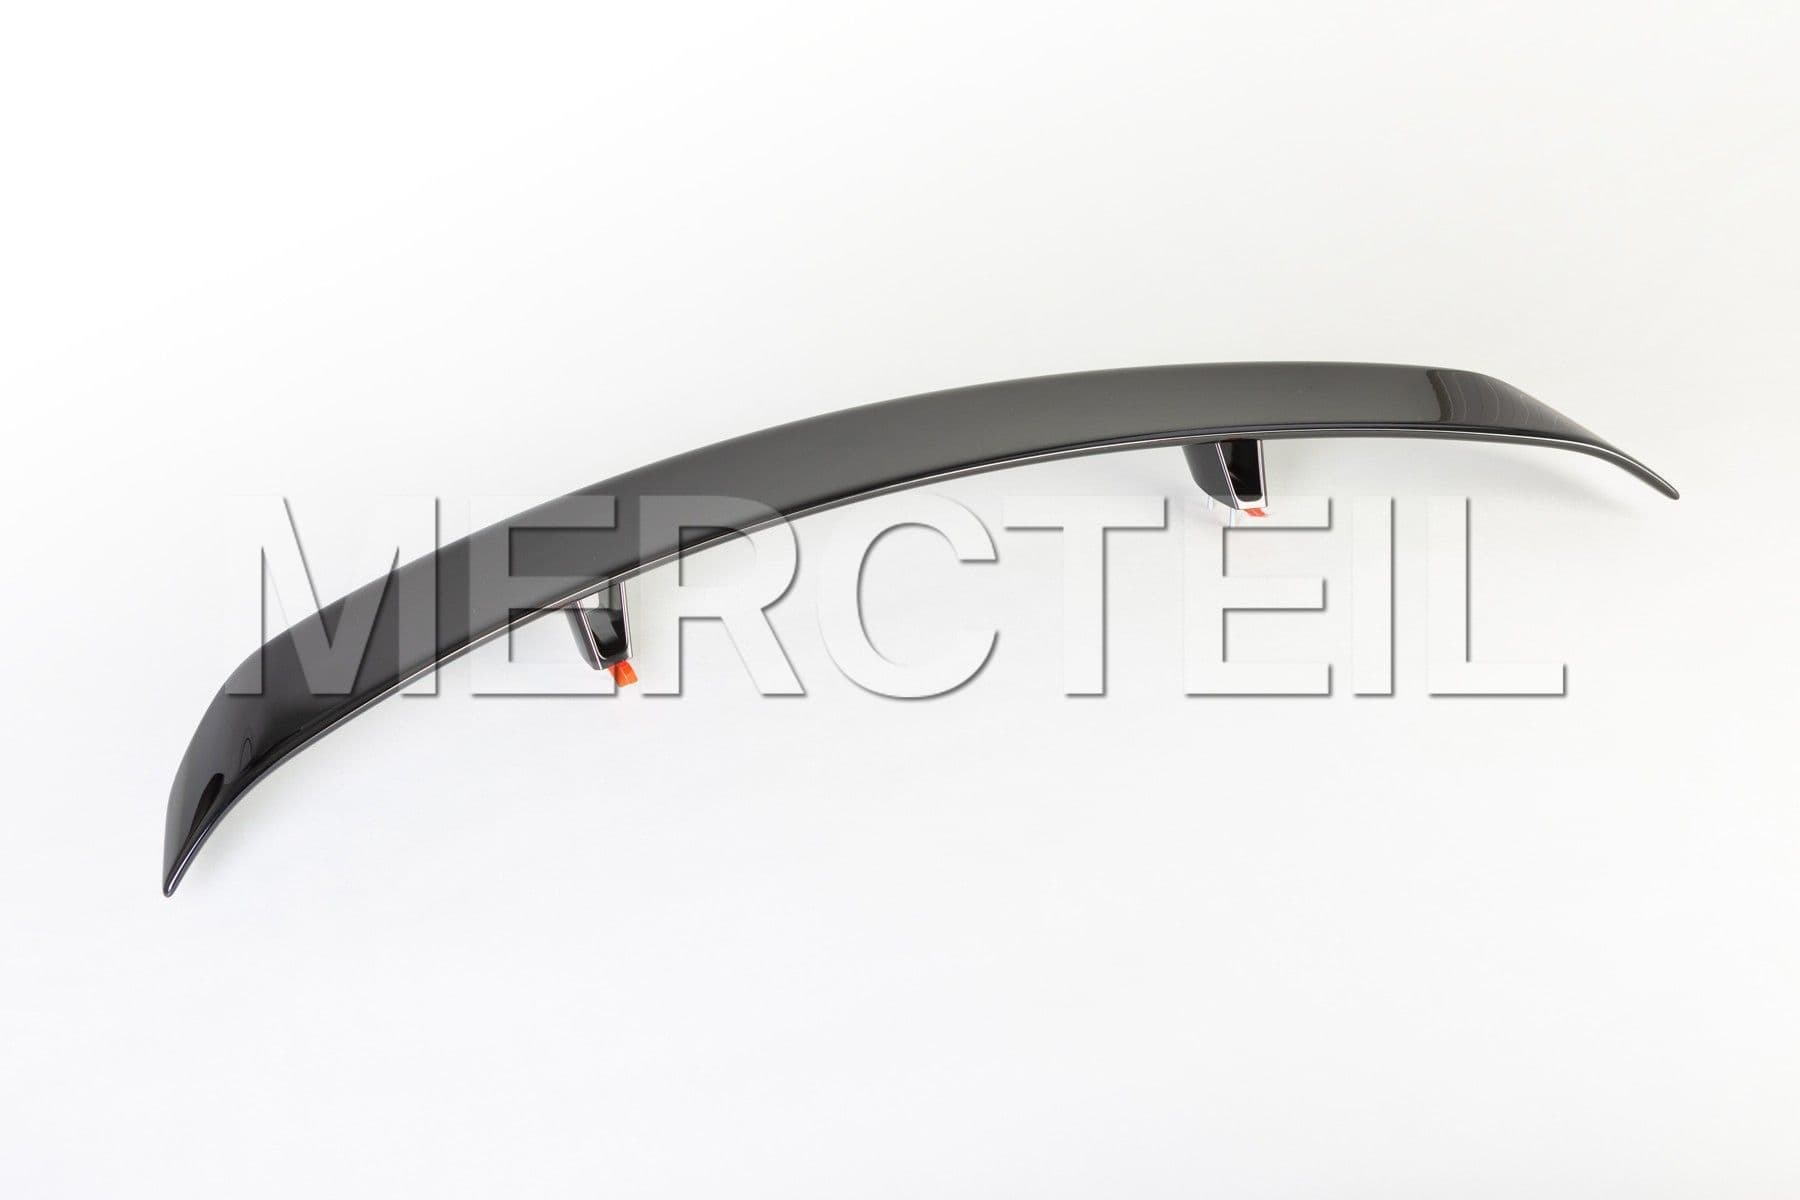 CLA45s AMG Static Rear Spoiler C118 Genuine Mercedes AMG (part number: 	
A1188840100)